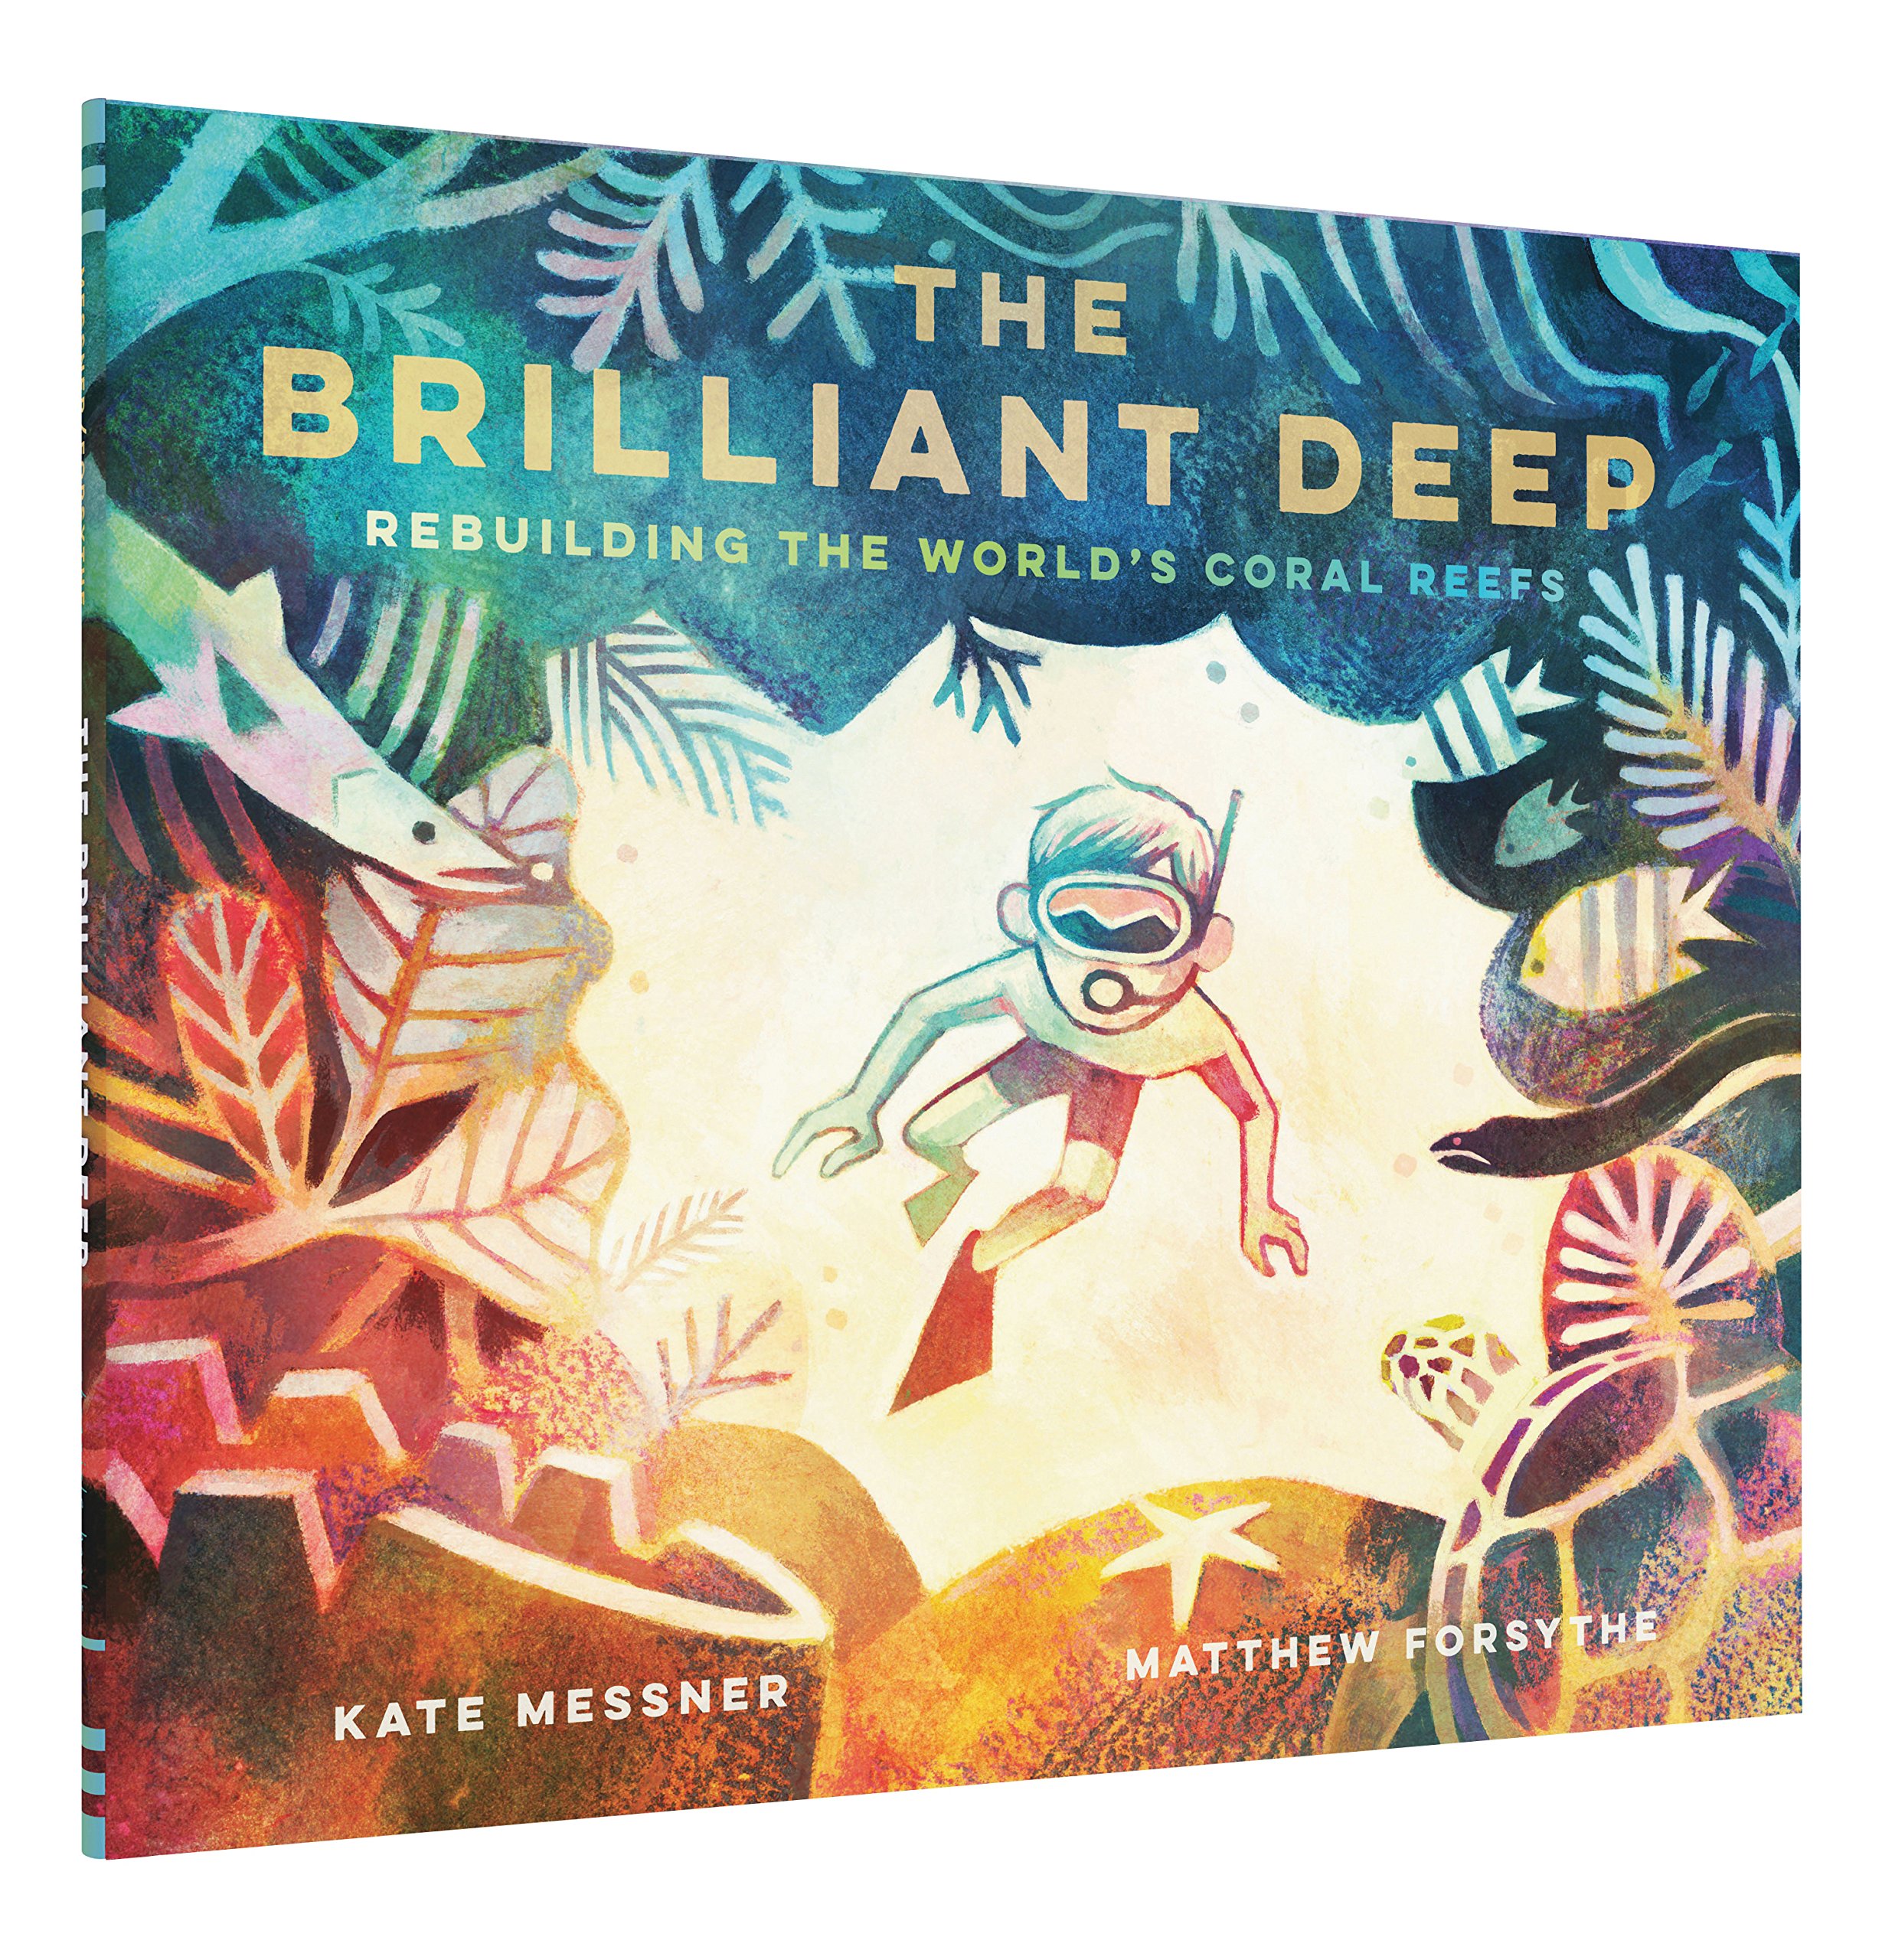 The Brilliant Deep: Rebuilding the World's Coral Reefs: The Story of Ken Nedimyer and the Coral Restoration Foundation